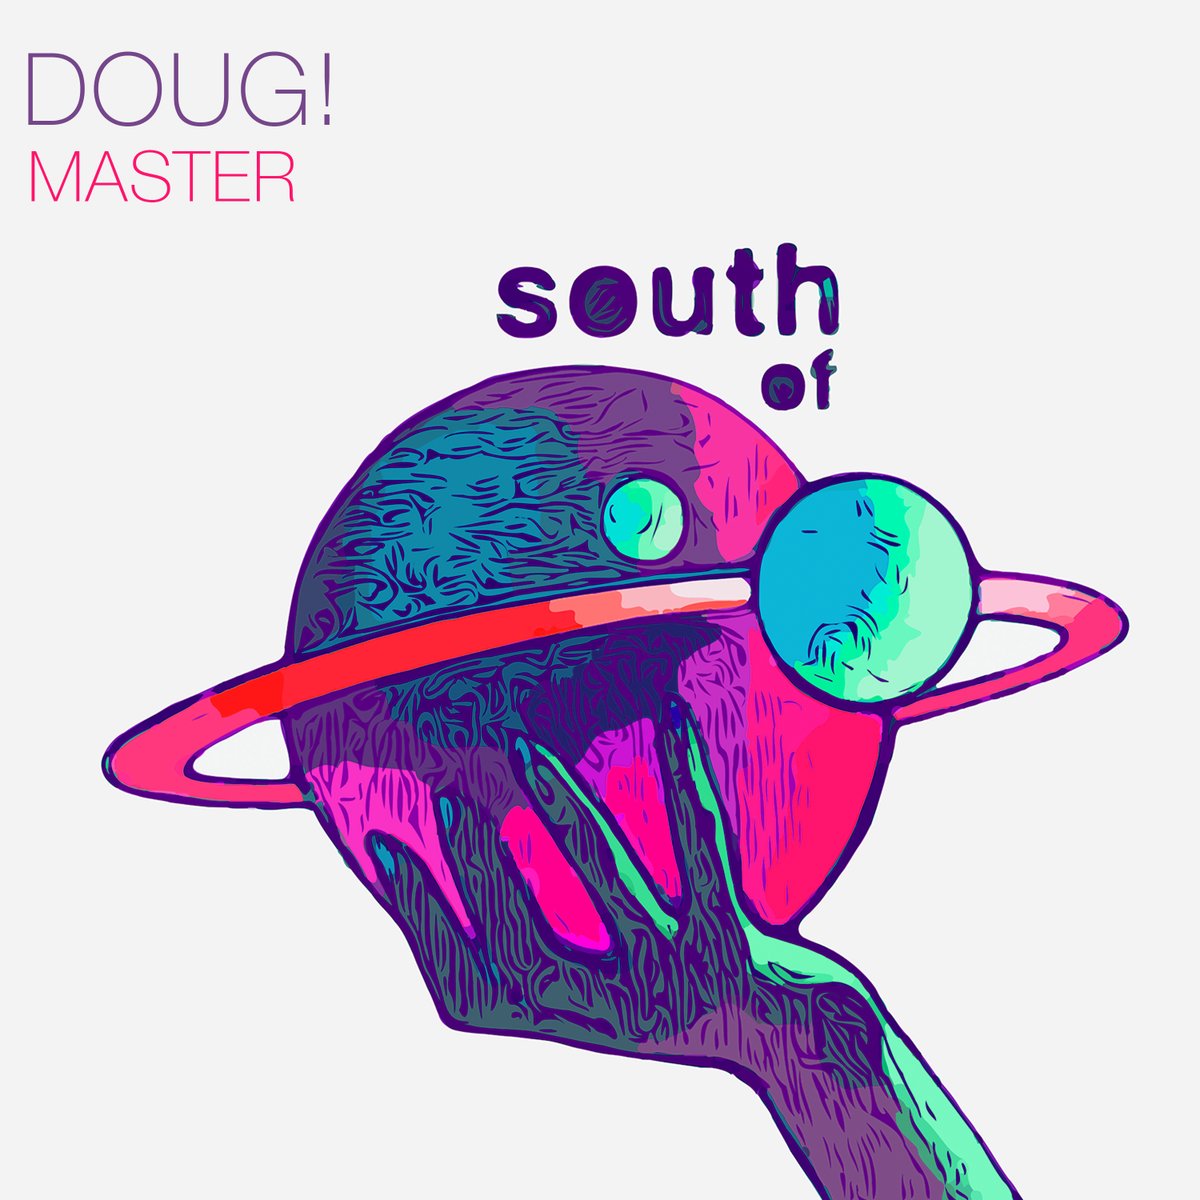 Back once again 😏DOUG! - Master Friday Link: orcd.co/sos091